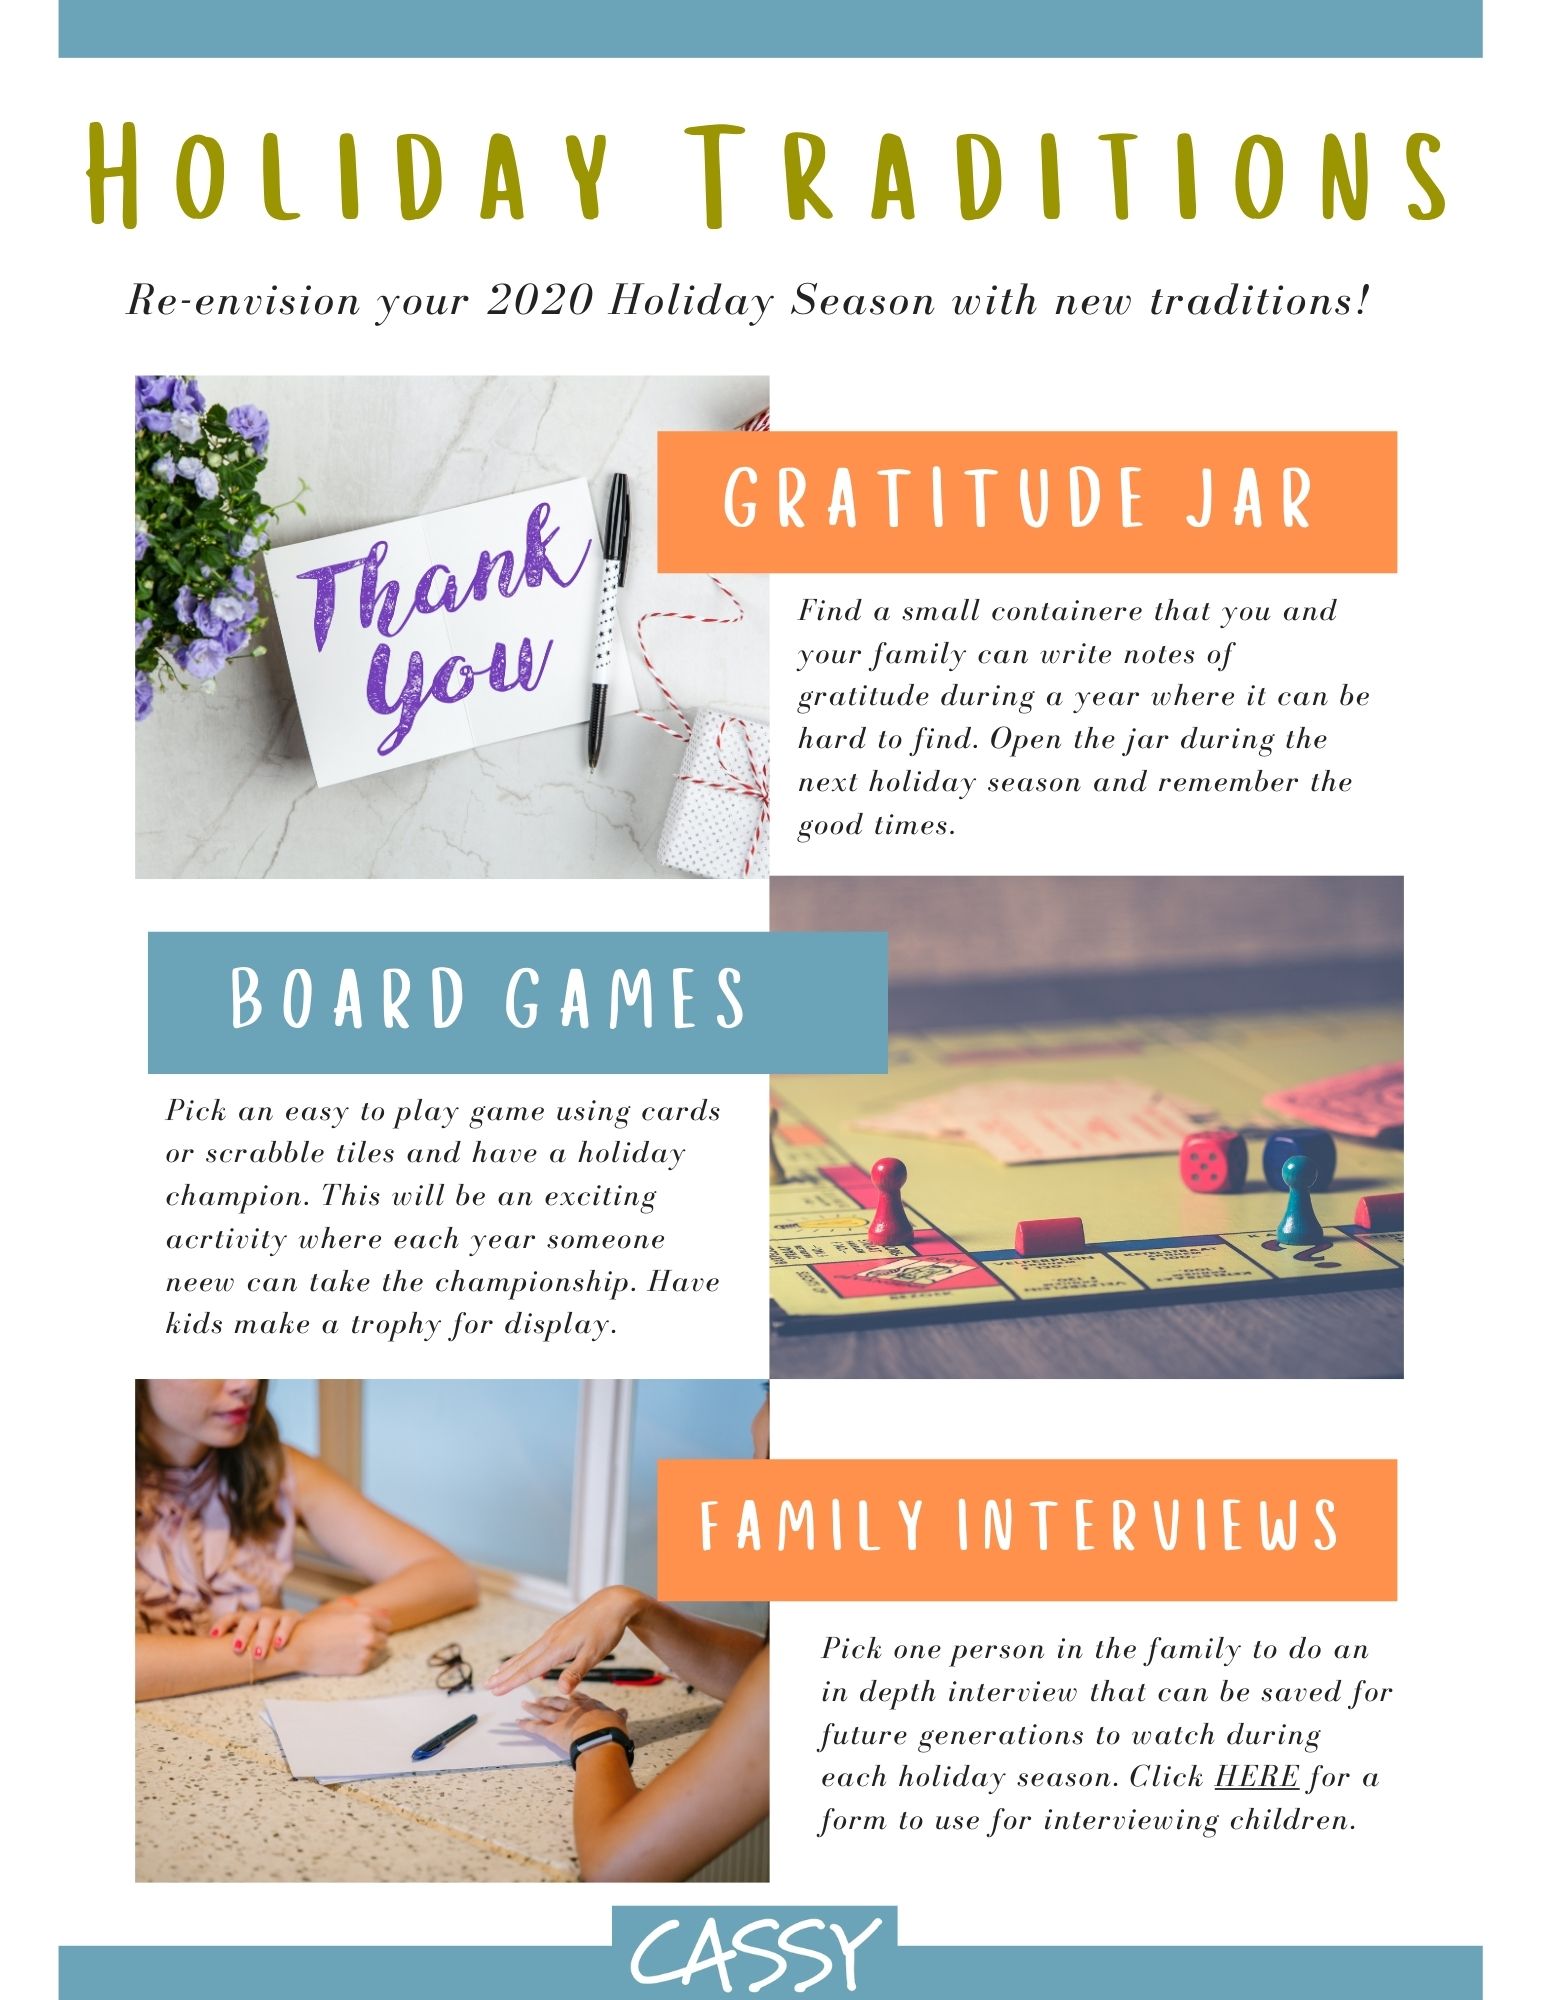 Re-envision your 2020 holiday season with new traditions, like a gratitude jar, playing board games, or conducting family interviews. Pick one family member to do an in-depth interview, which can be saved for future generations.